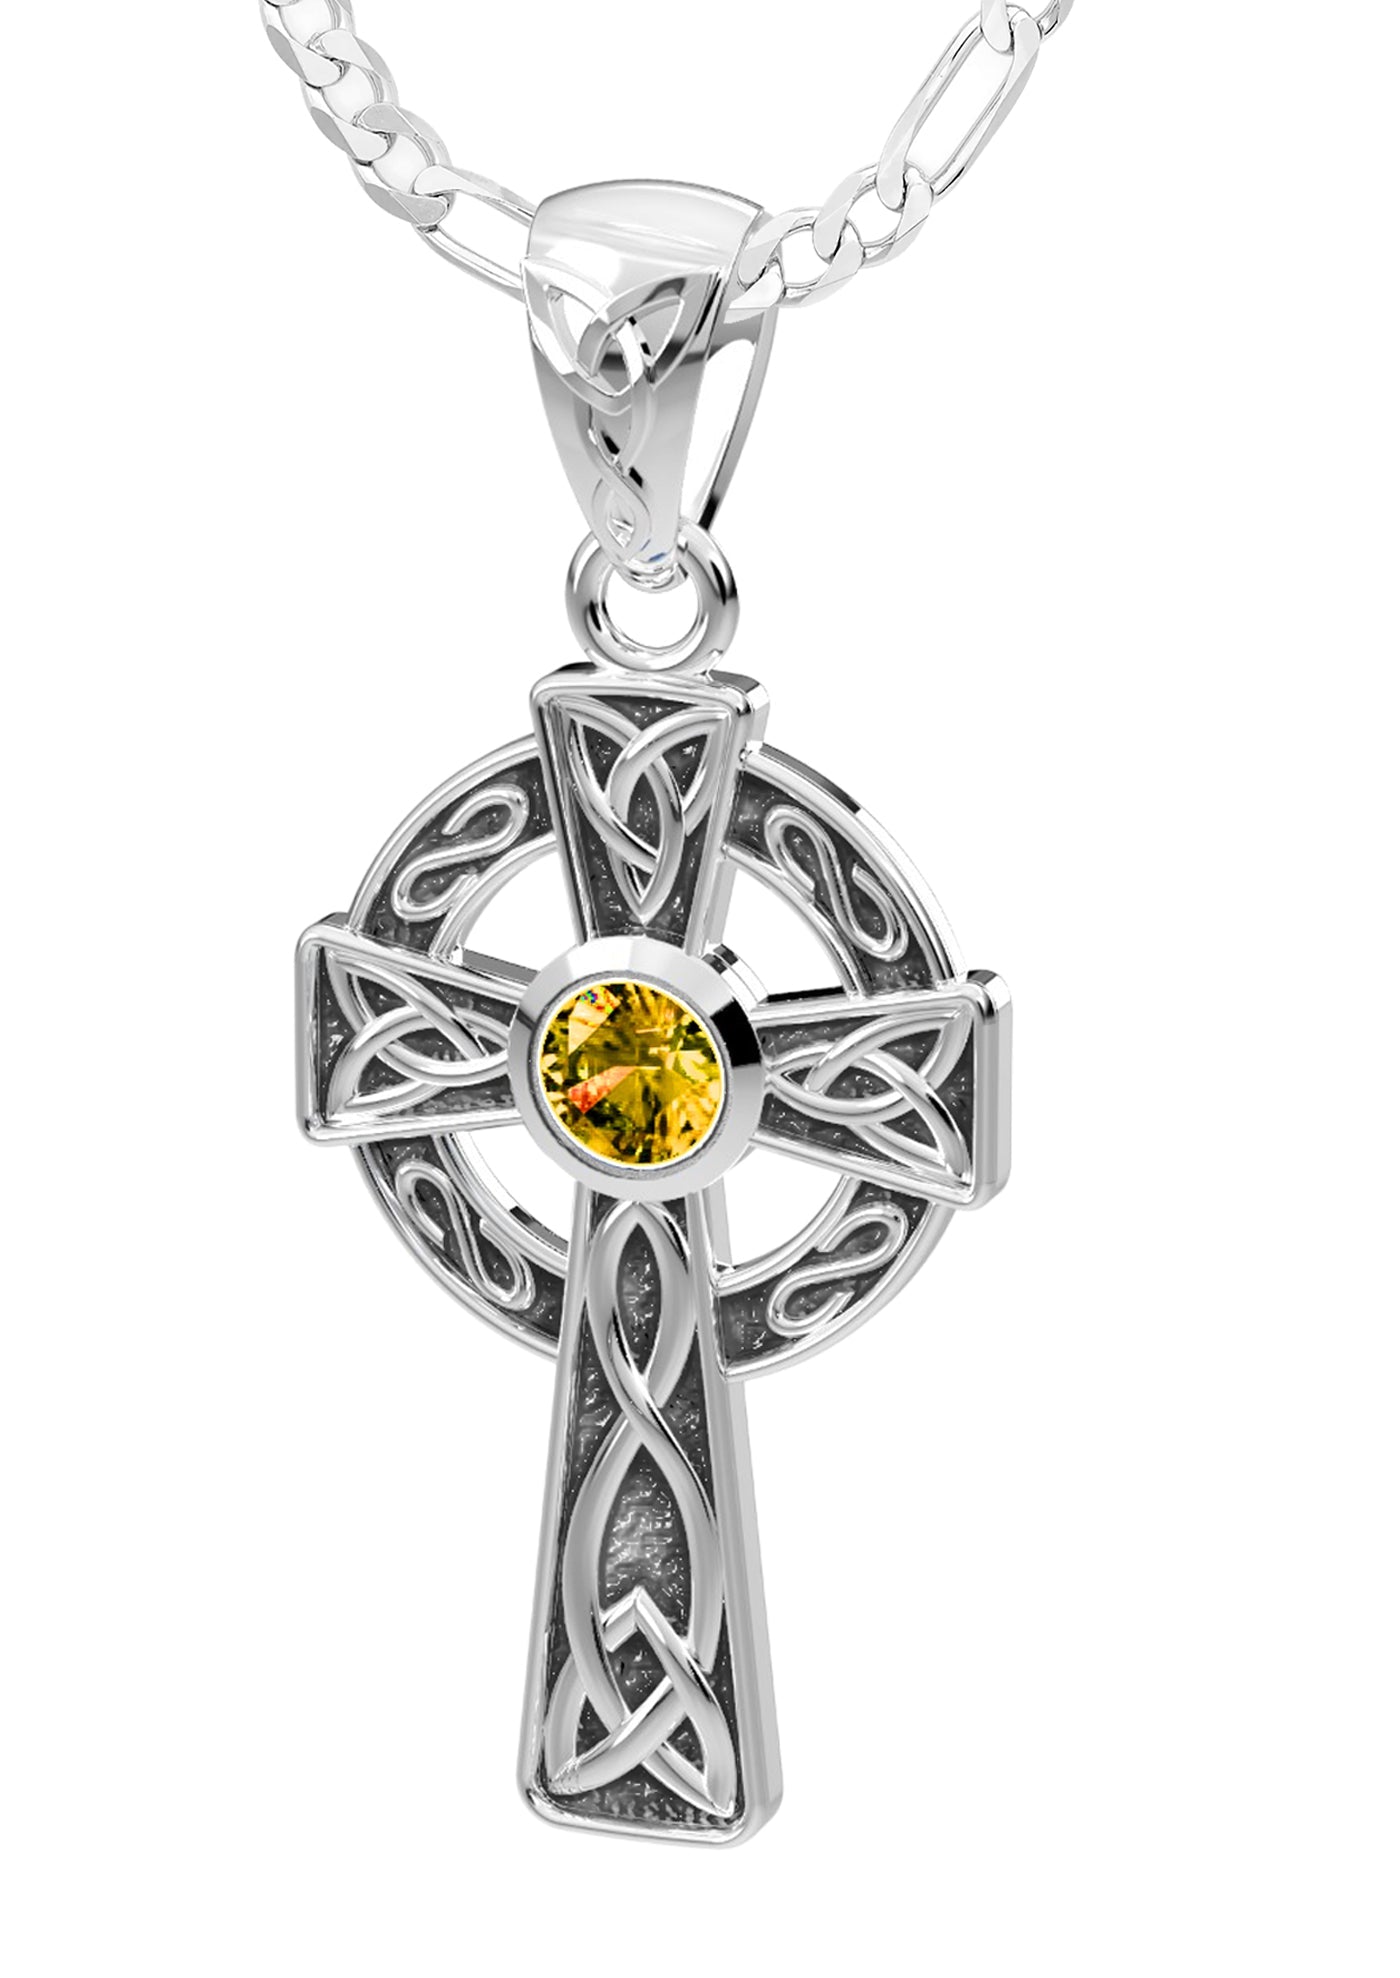 Ladies 925 Sterling Silver 23mm Irish Celtic Knot Cross Pendant Necklace with 13 Birthstone Options - US Jewels